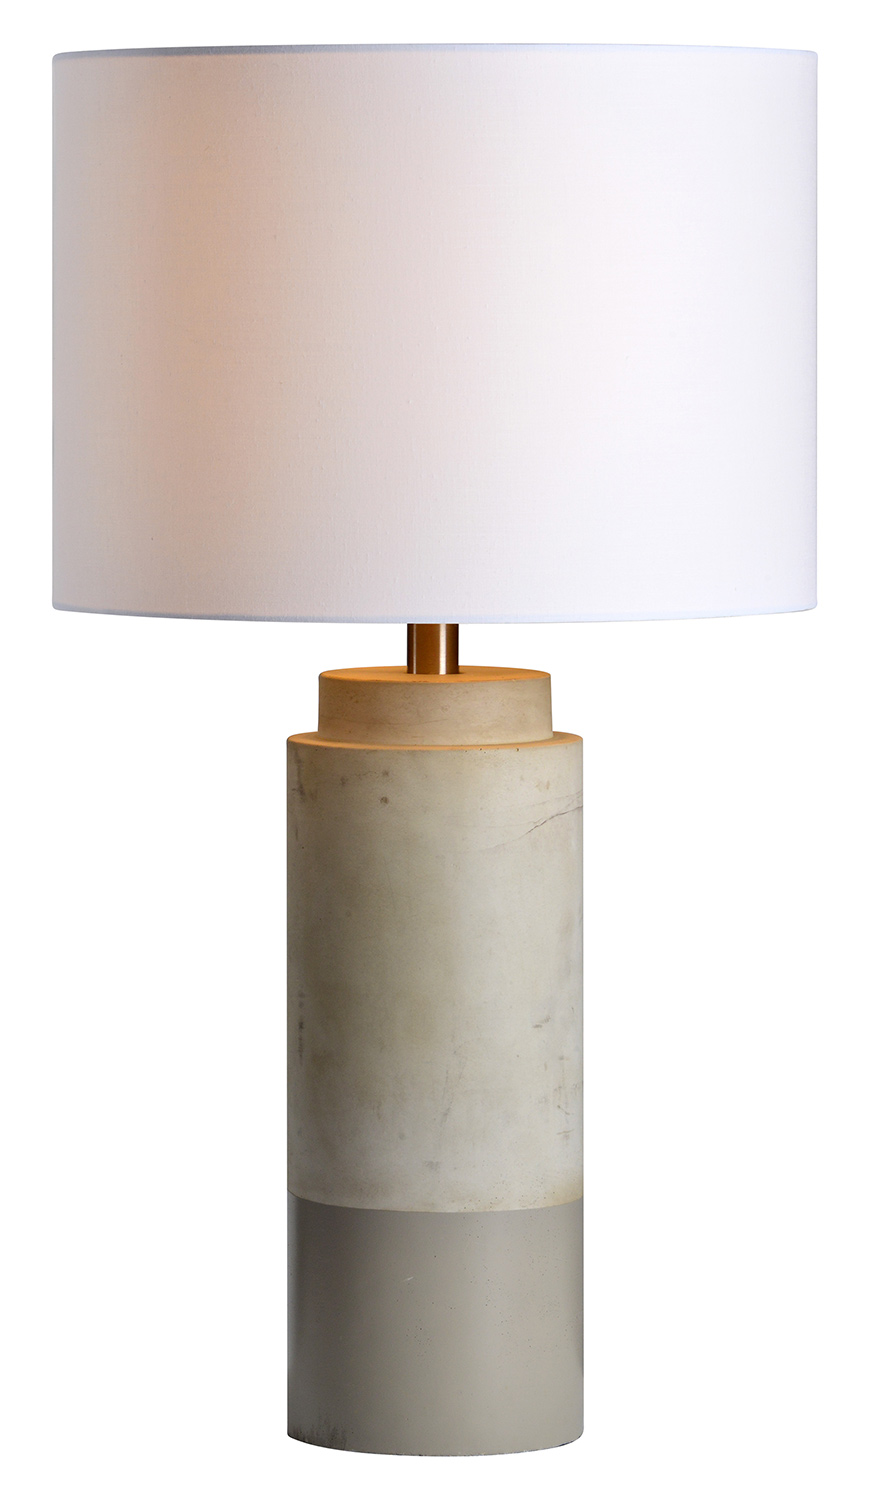 Ren-Wil Lagertha Table Lamp - Sand Brown